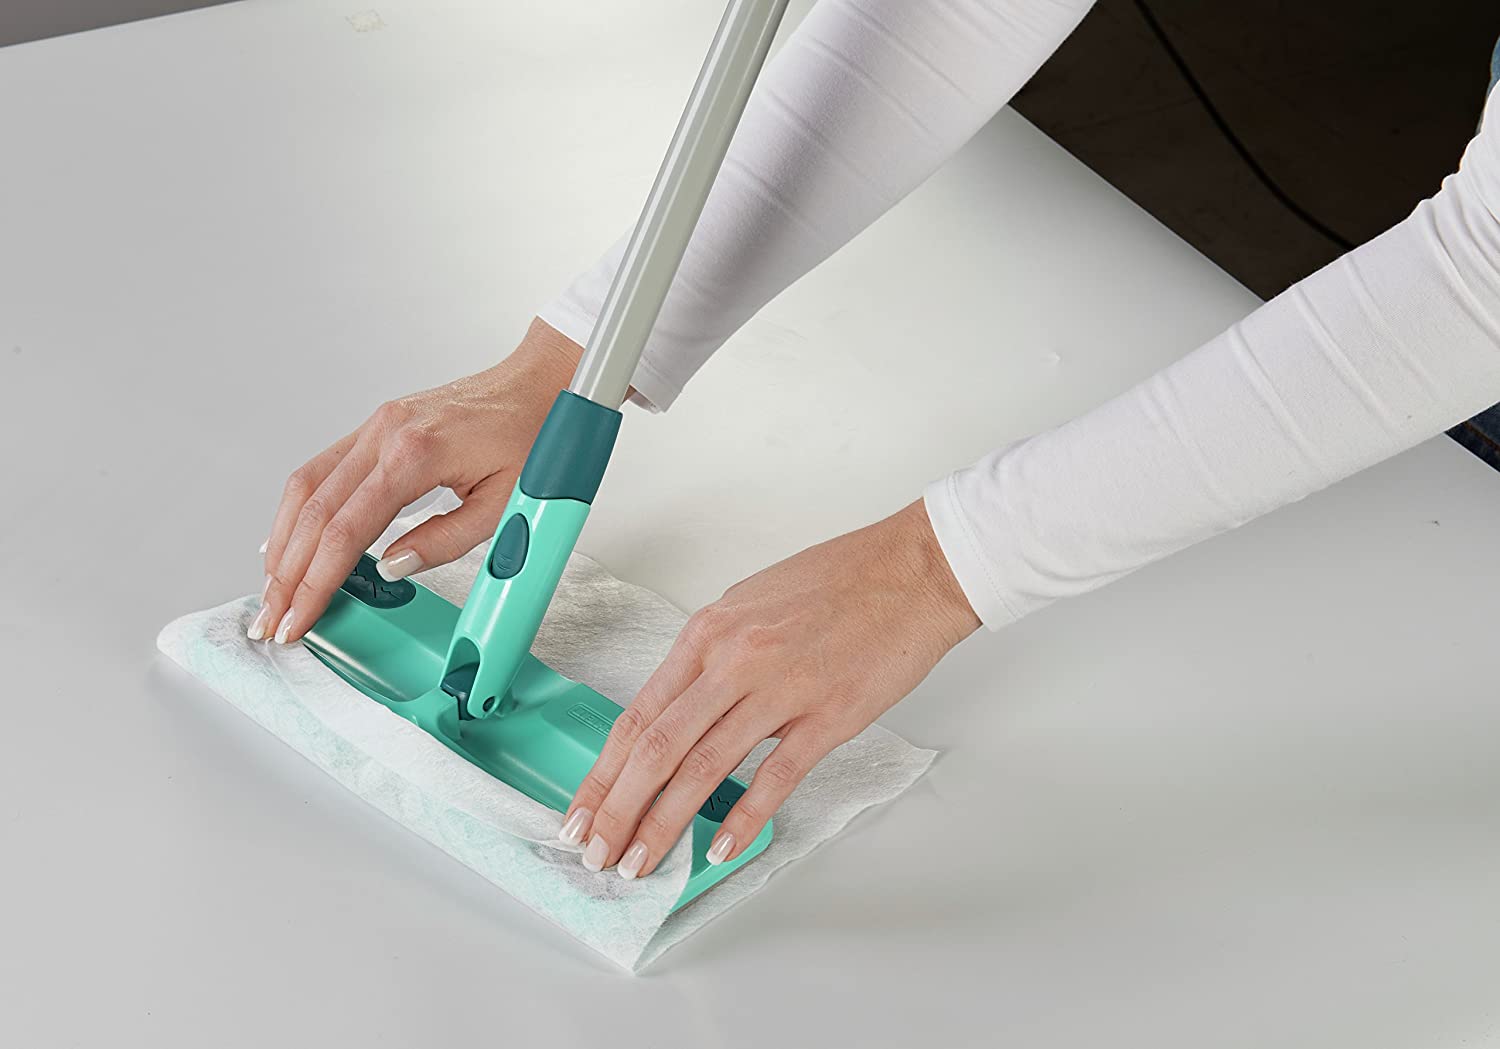 Leifheit Clean & Away Dry Dusting Mop with x5 Disposable Dust-attracting Cloths 